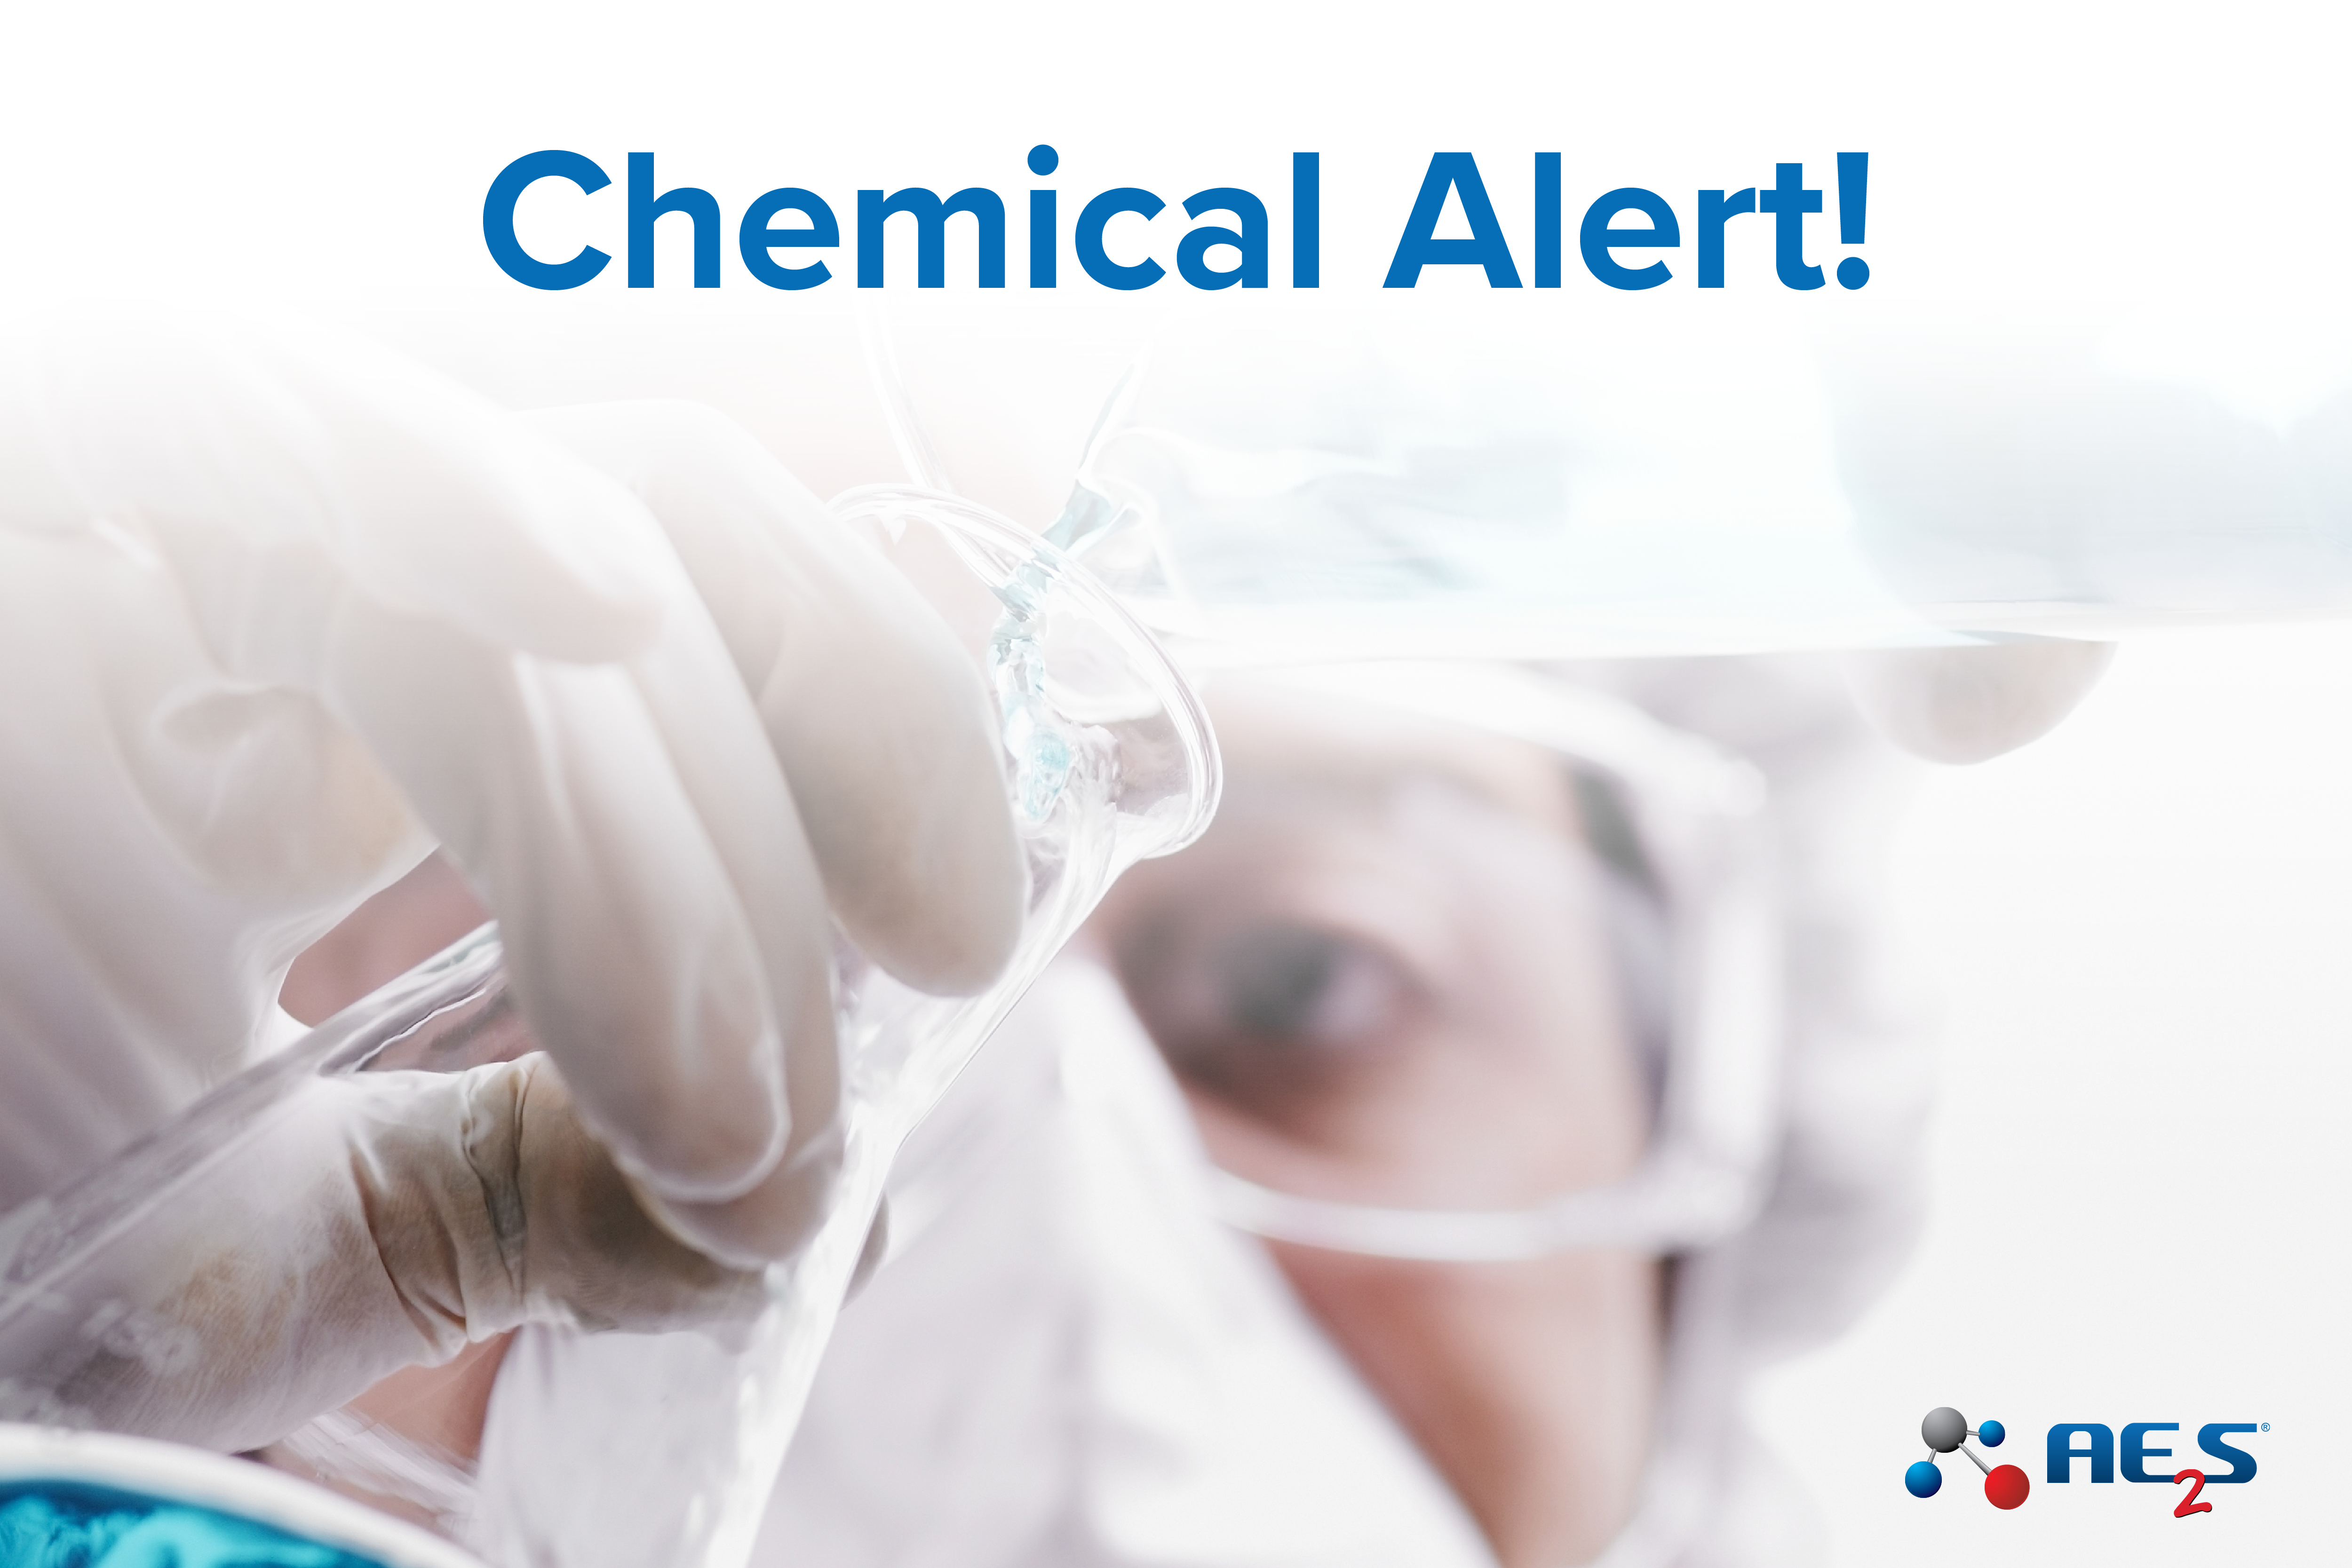 USEPA Begins Process to Prioritize Five Chemicals Under Toxic Substances Control Act